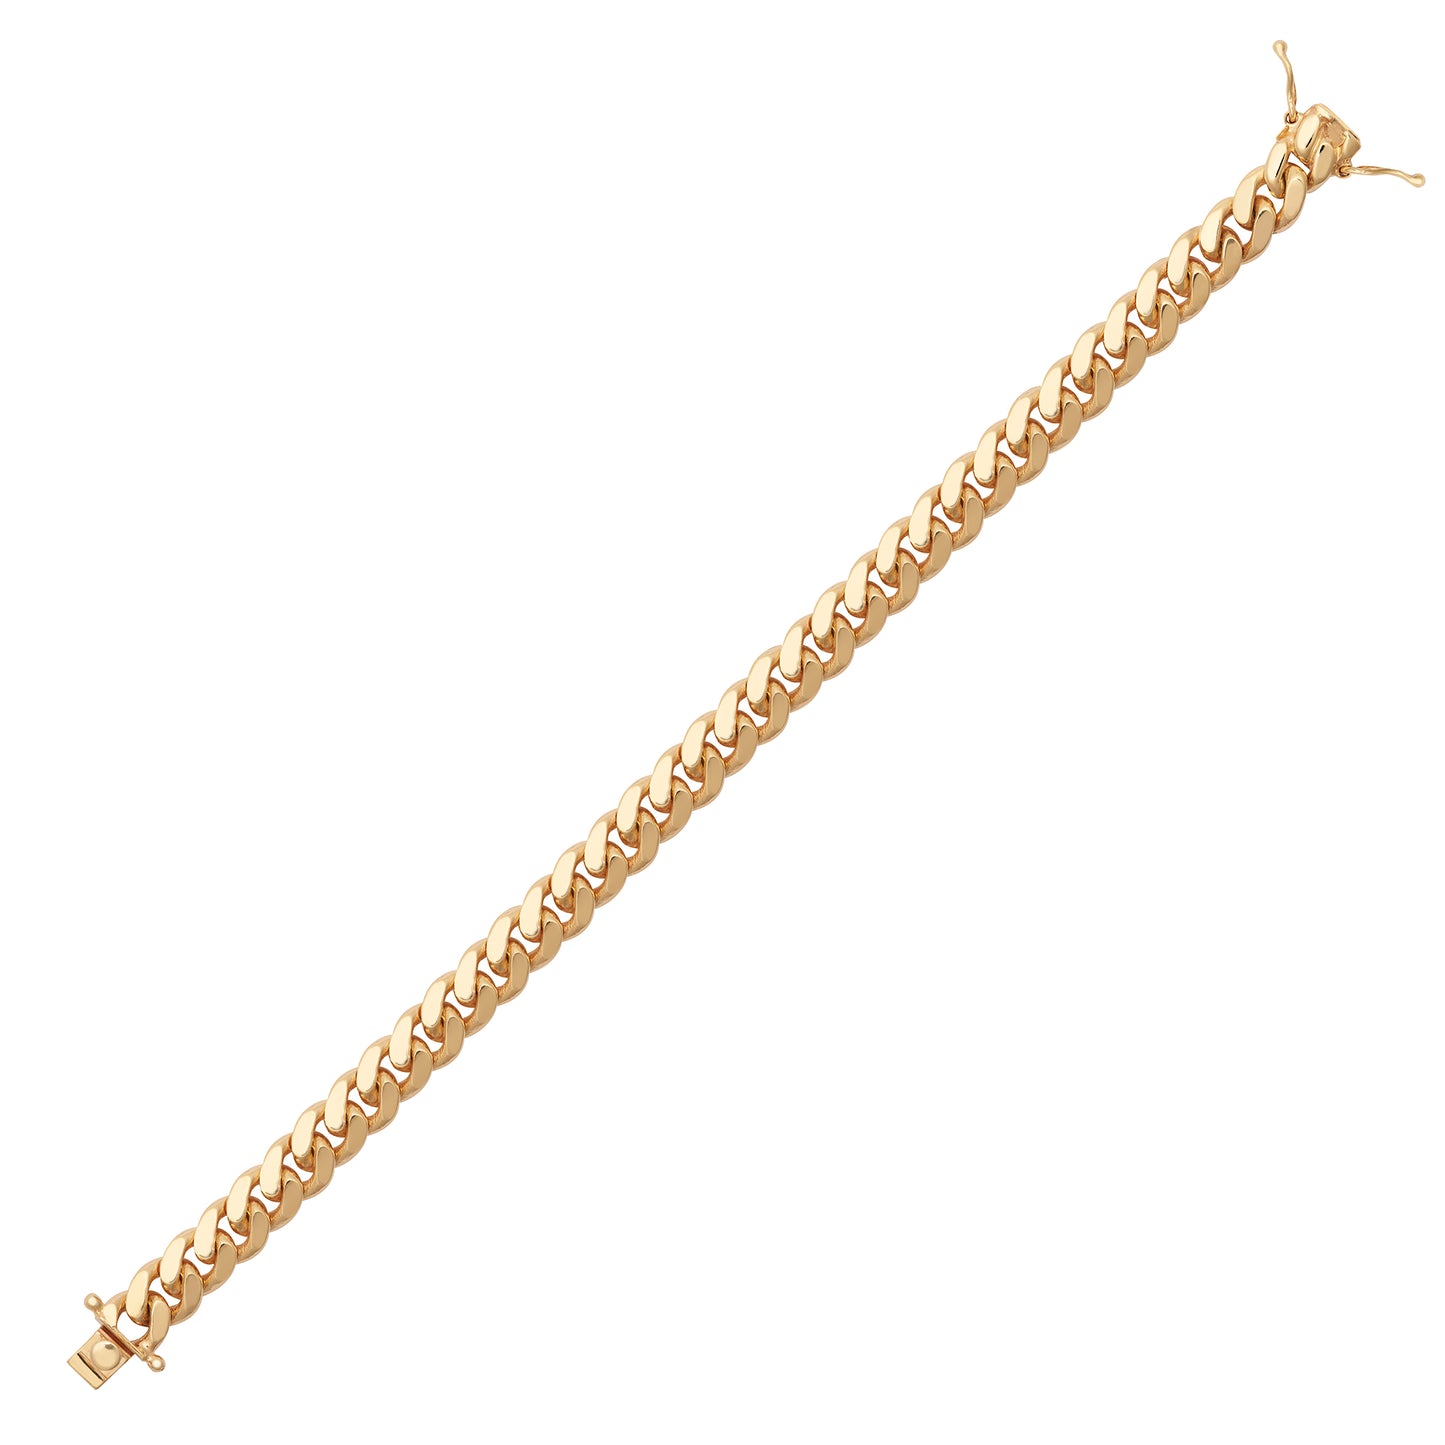 9ct Gold  Domed Cuban Curb 9mm Chain Link Bracelet, 8.5 inch 21cm - JCN090A